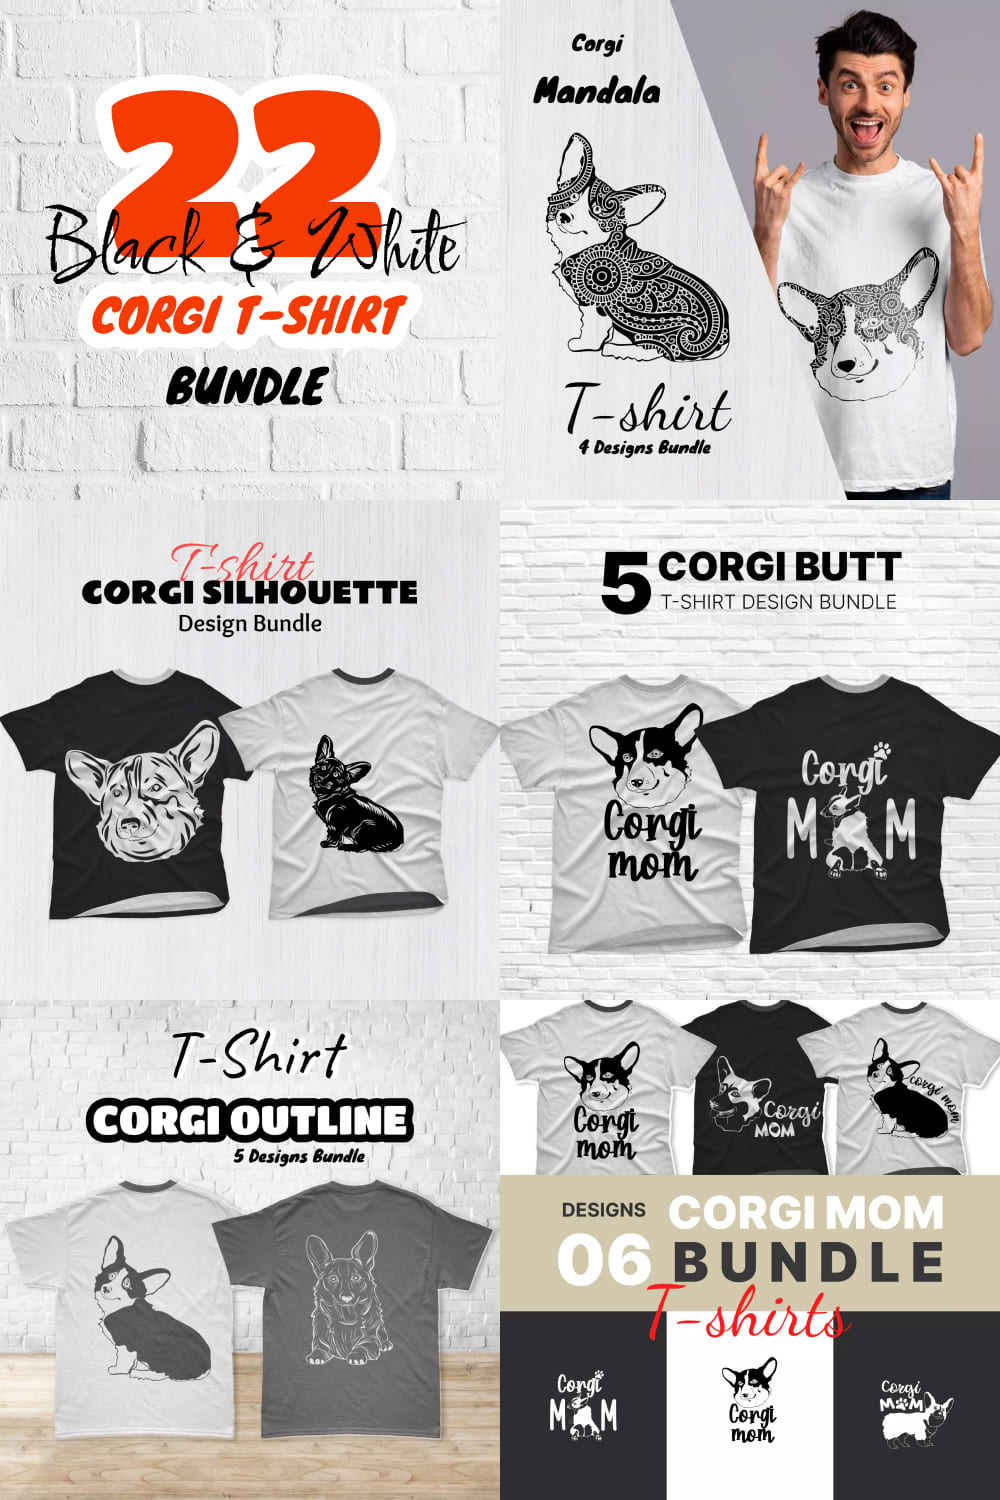 A pack of images of t-shirts with amazing black and white corgi print.